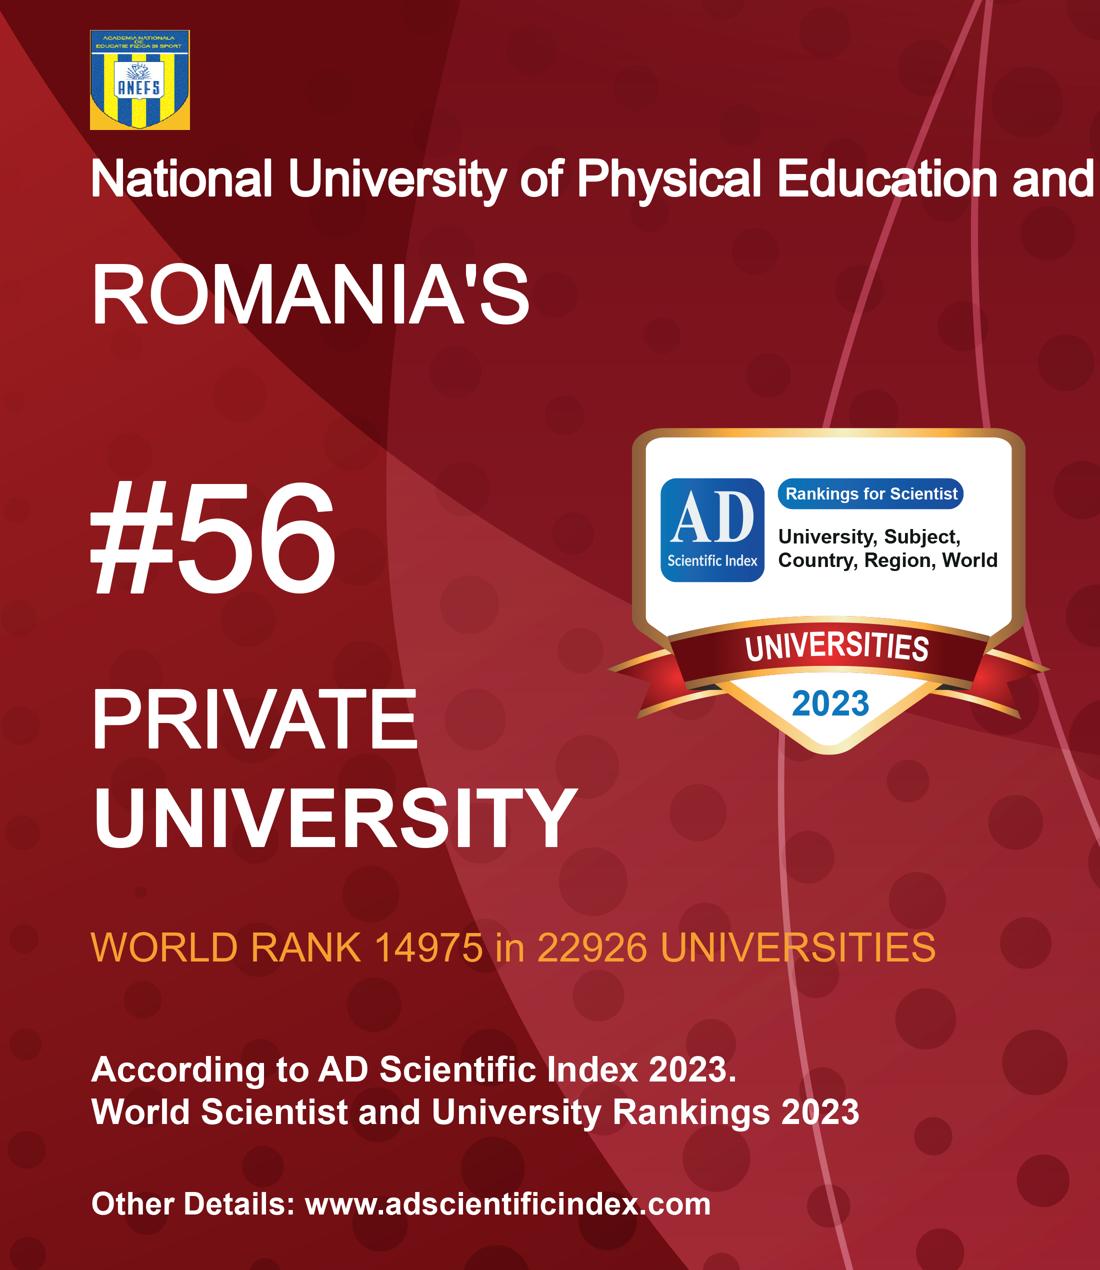 National University of Physical Education and Sports